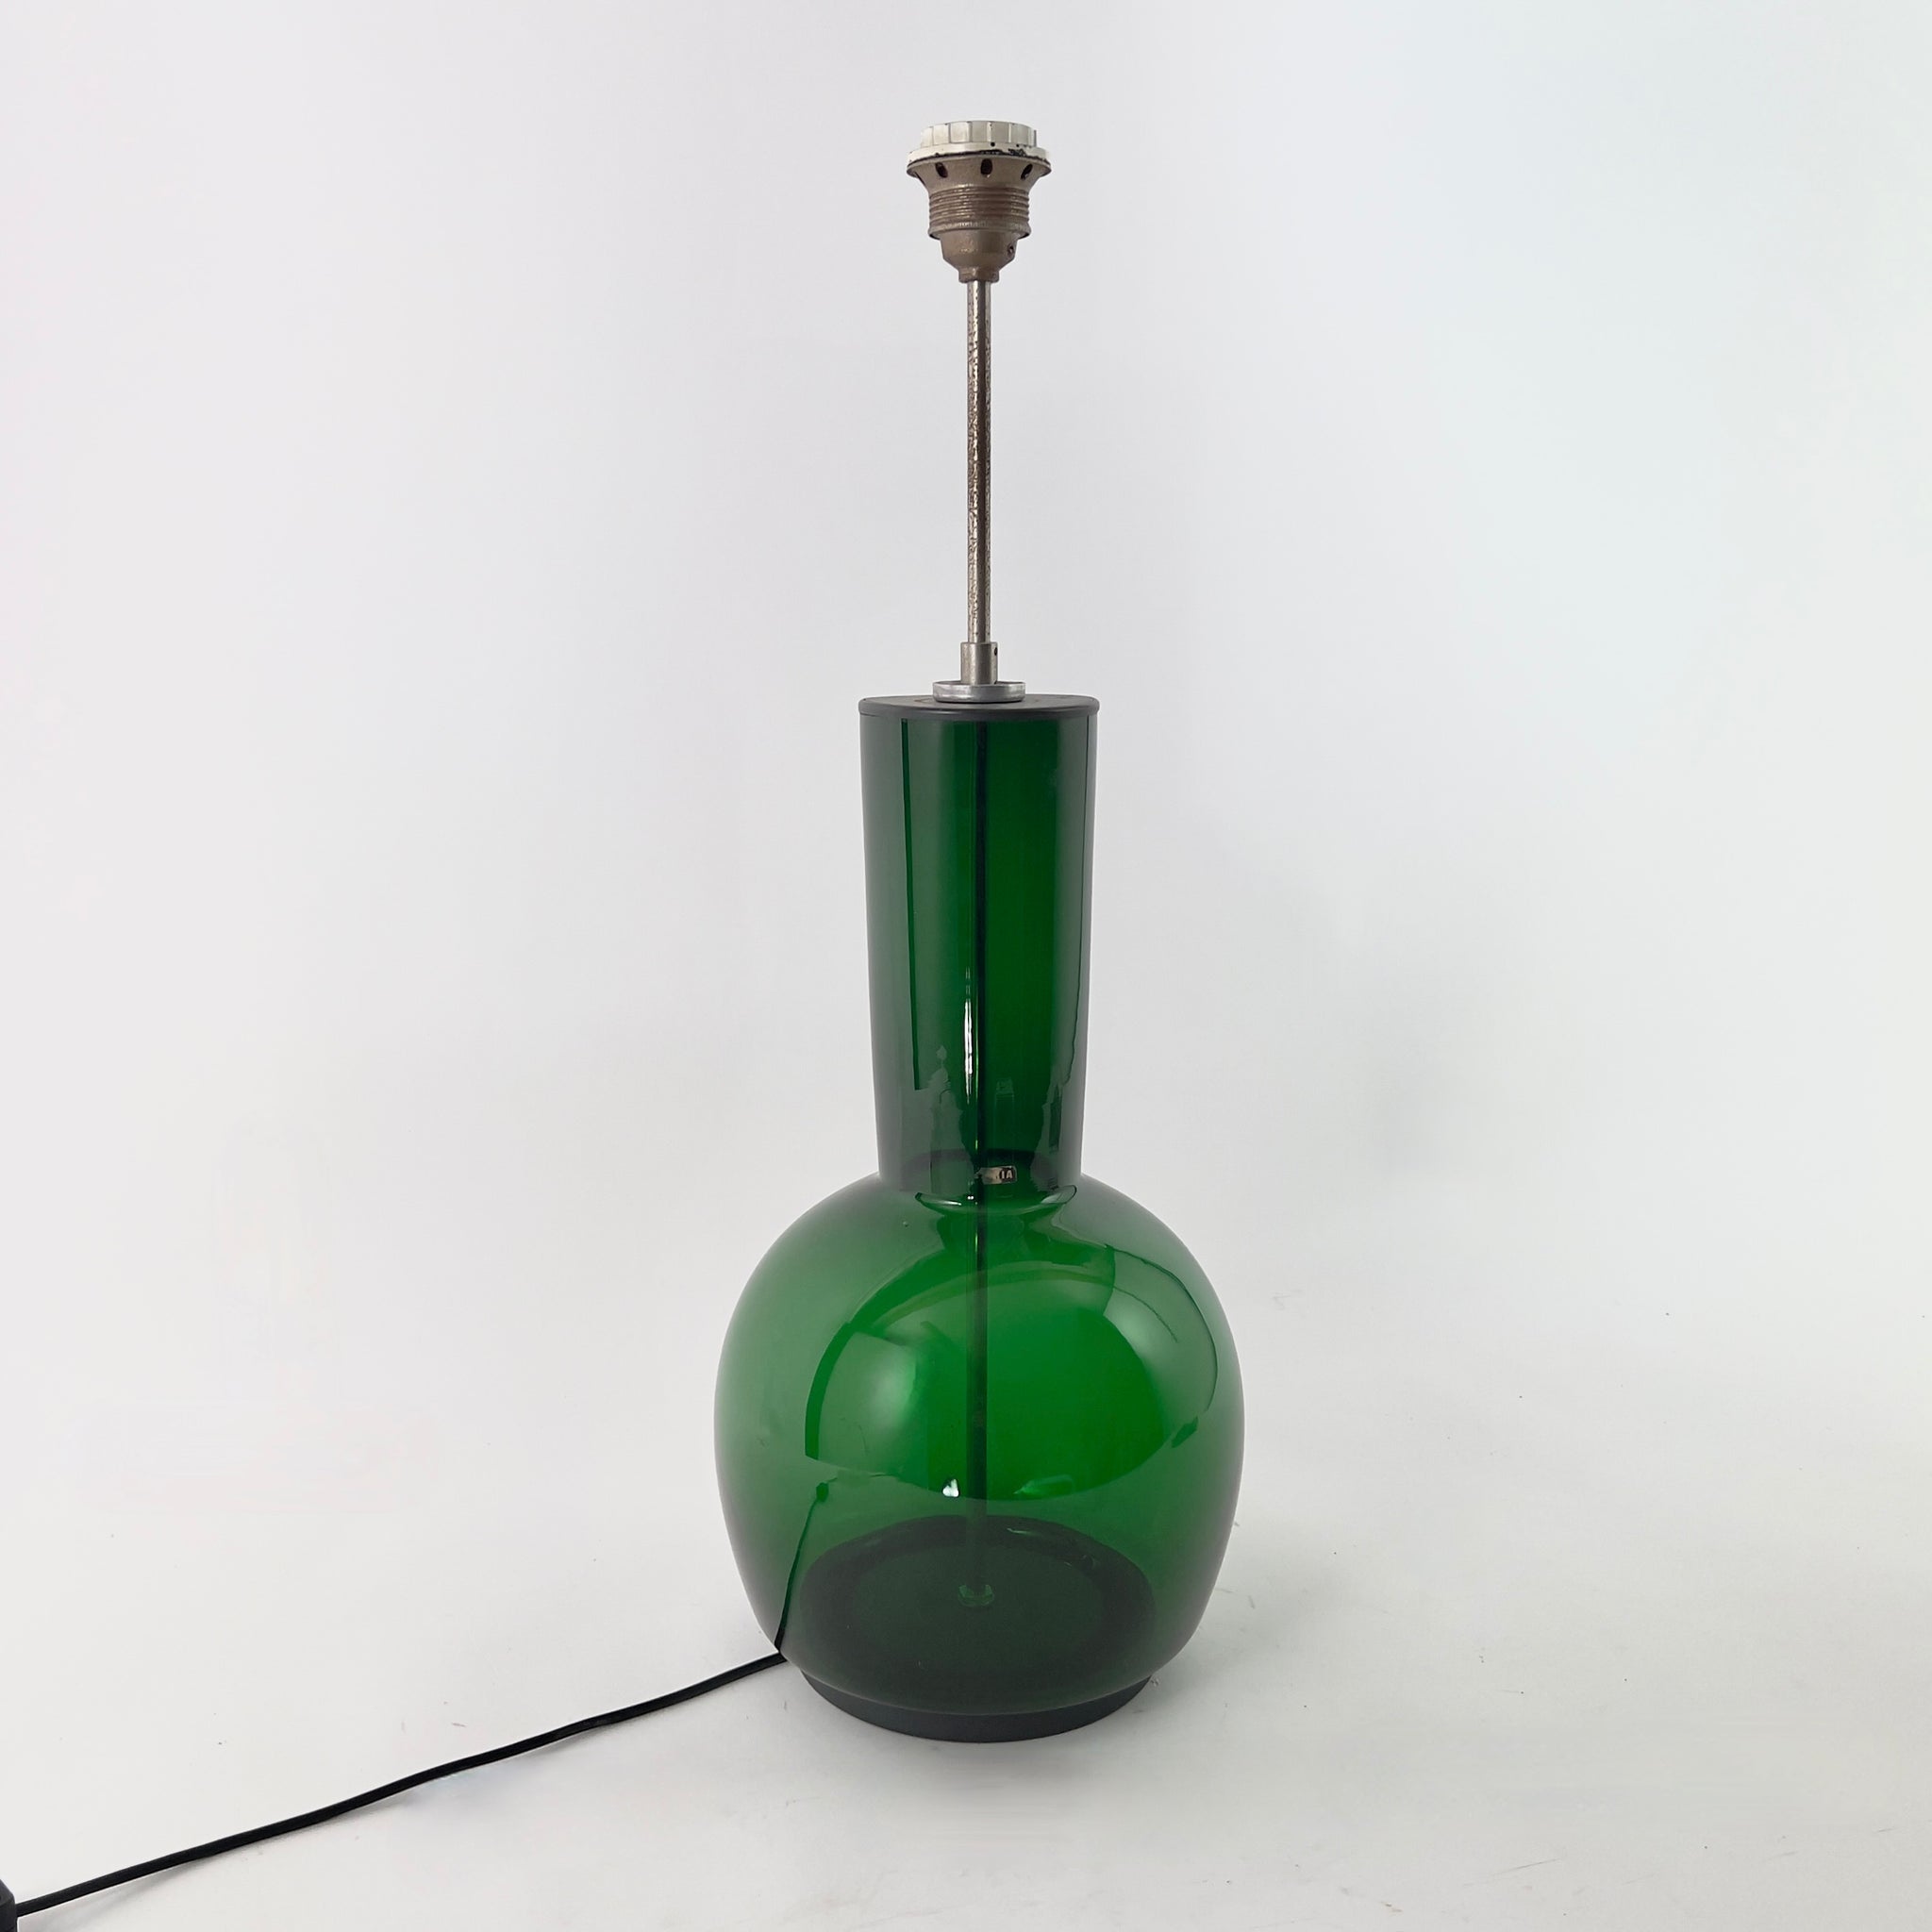 Stylish 1960's green glass lamp with by Doria  Leuchten .